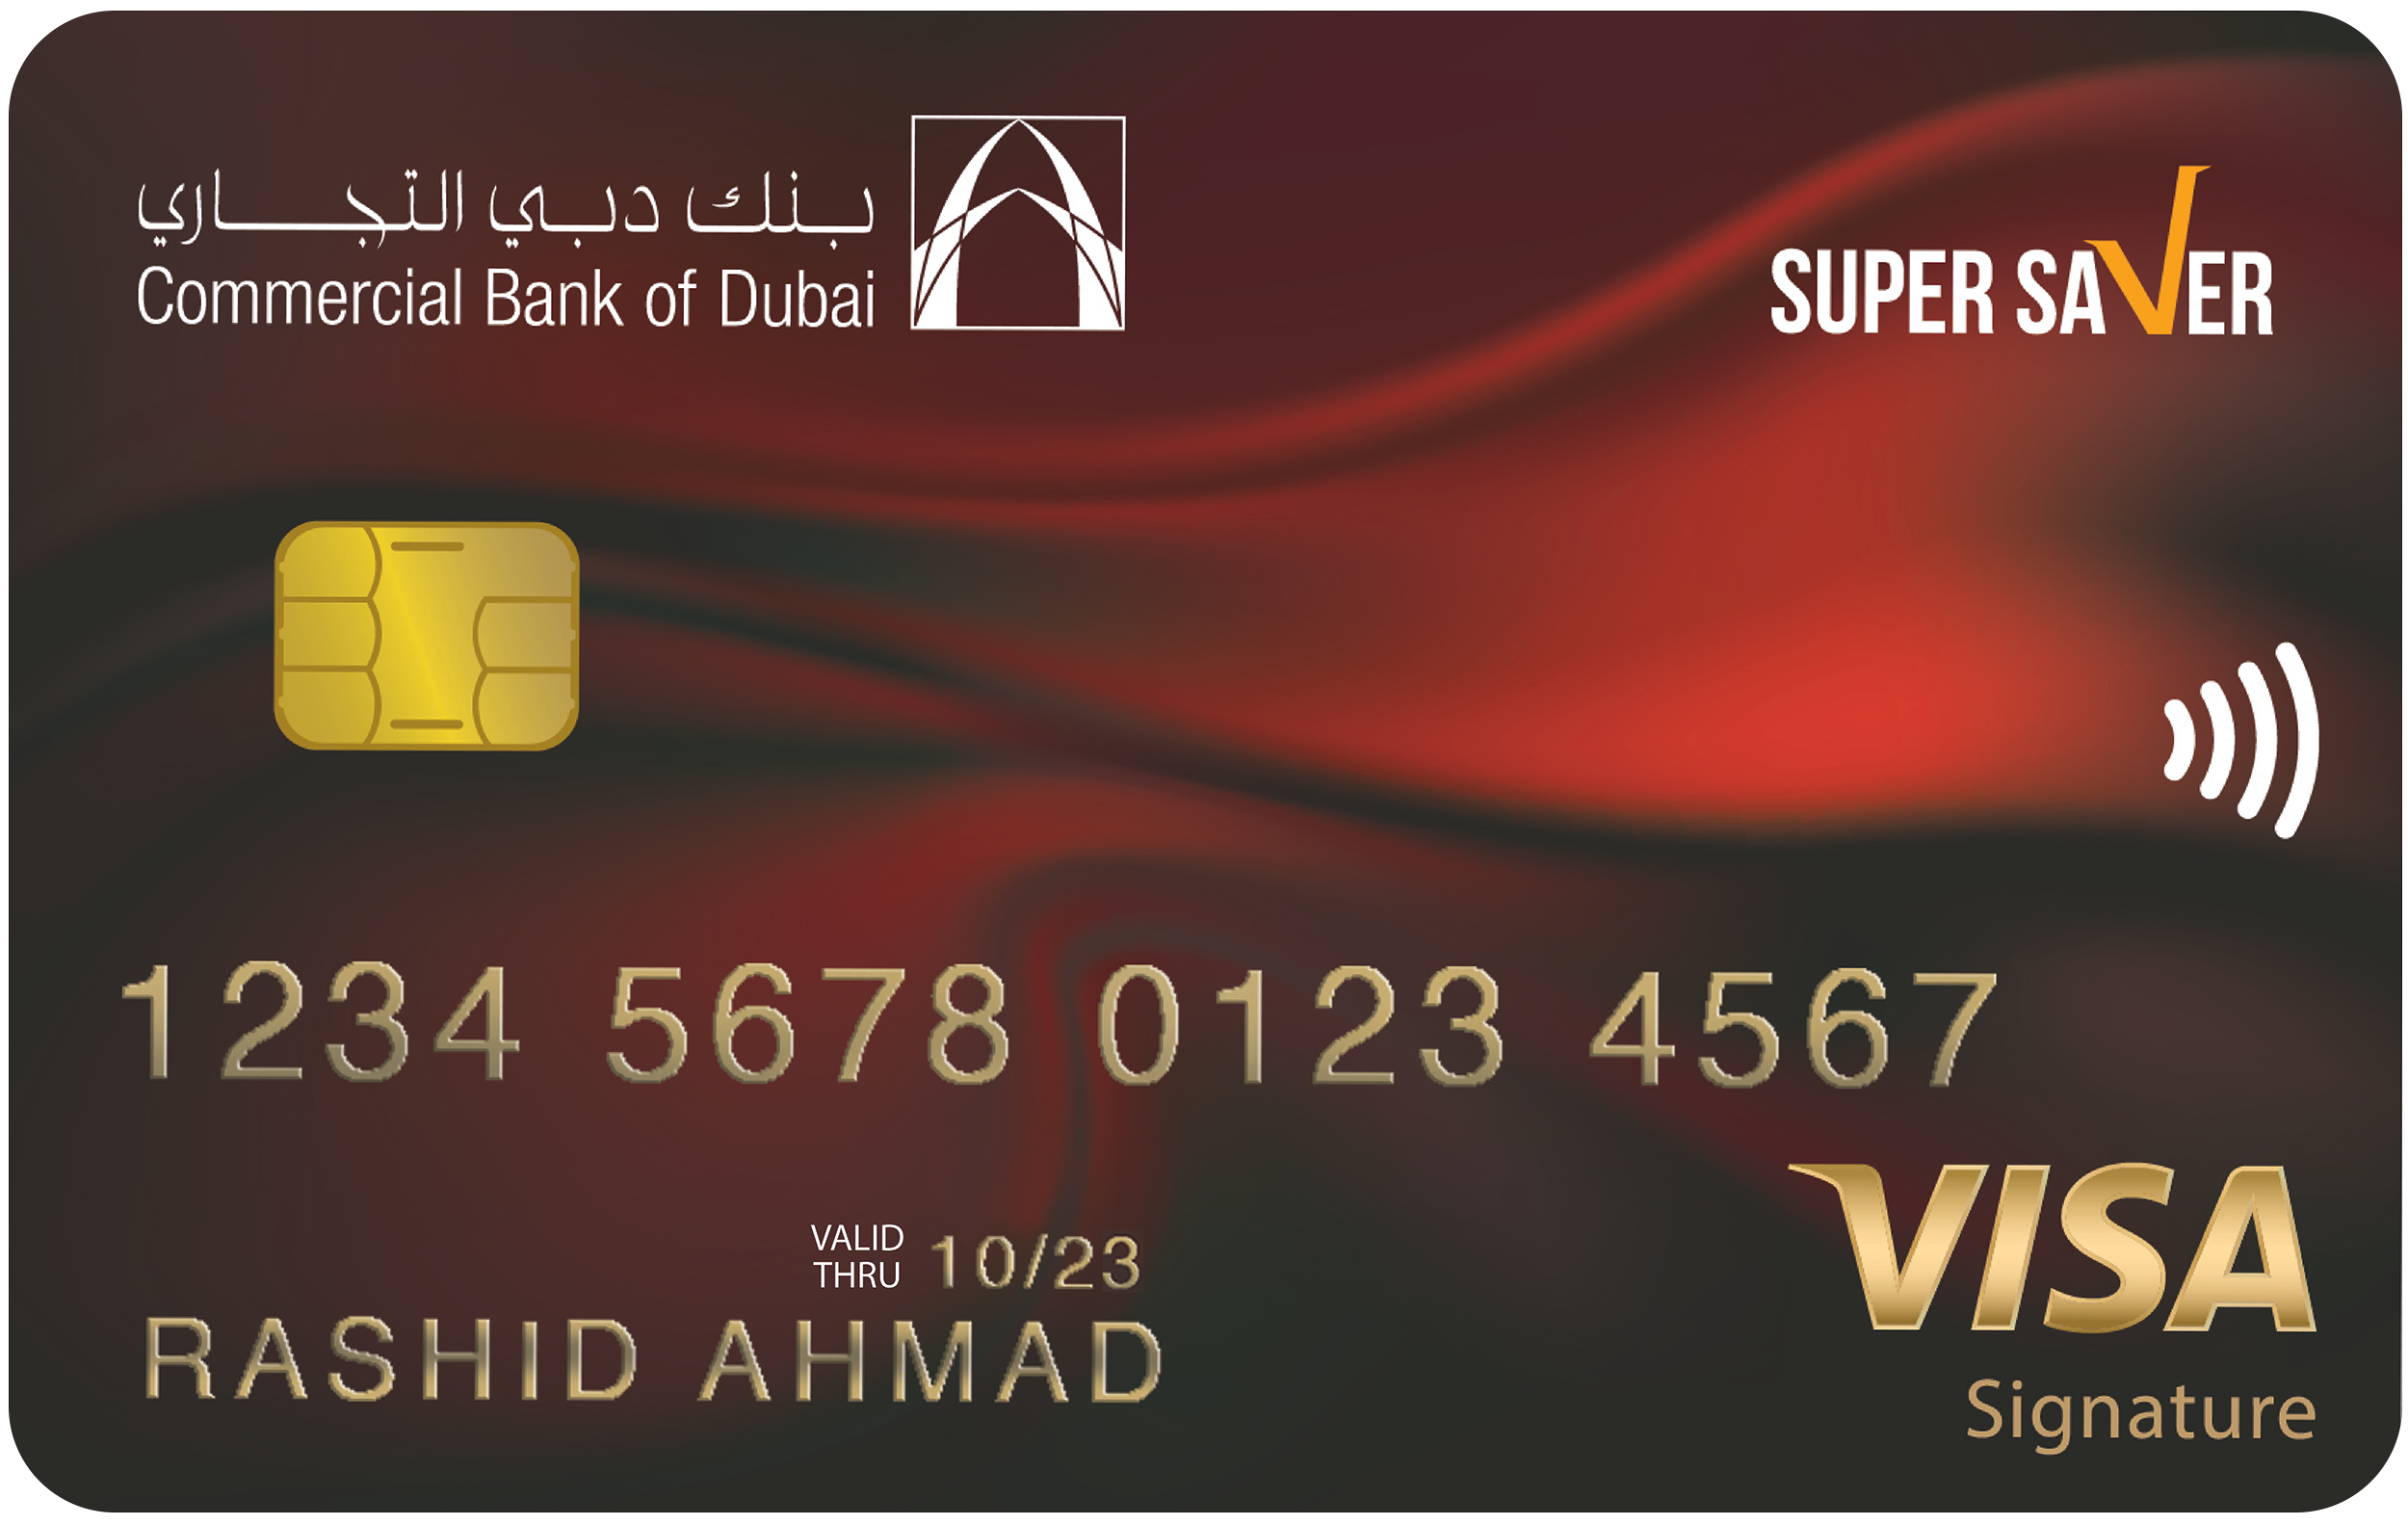 Supersaver card_new